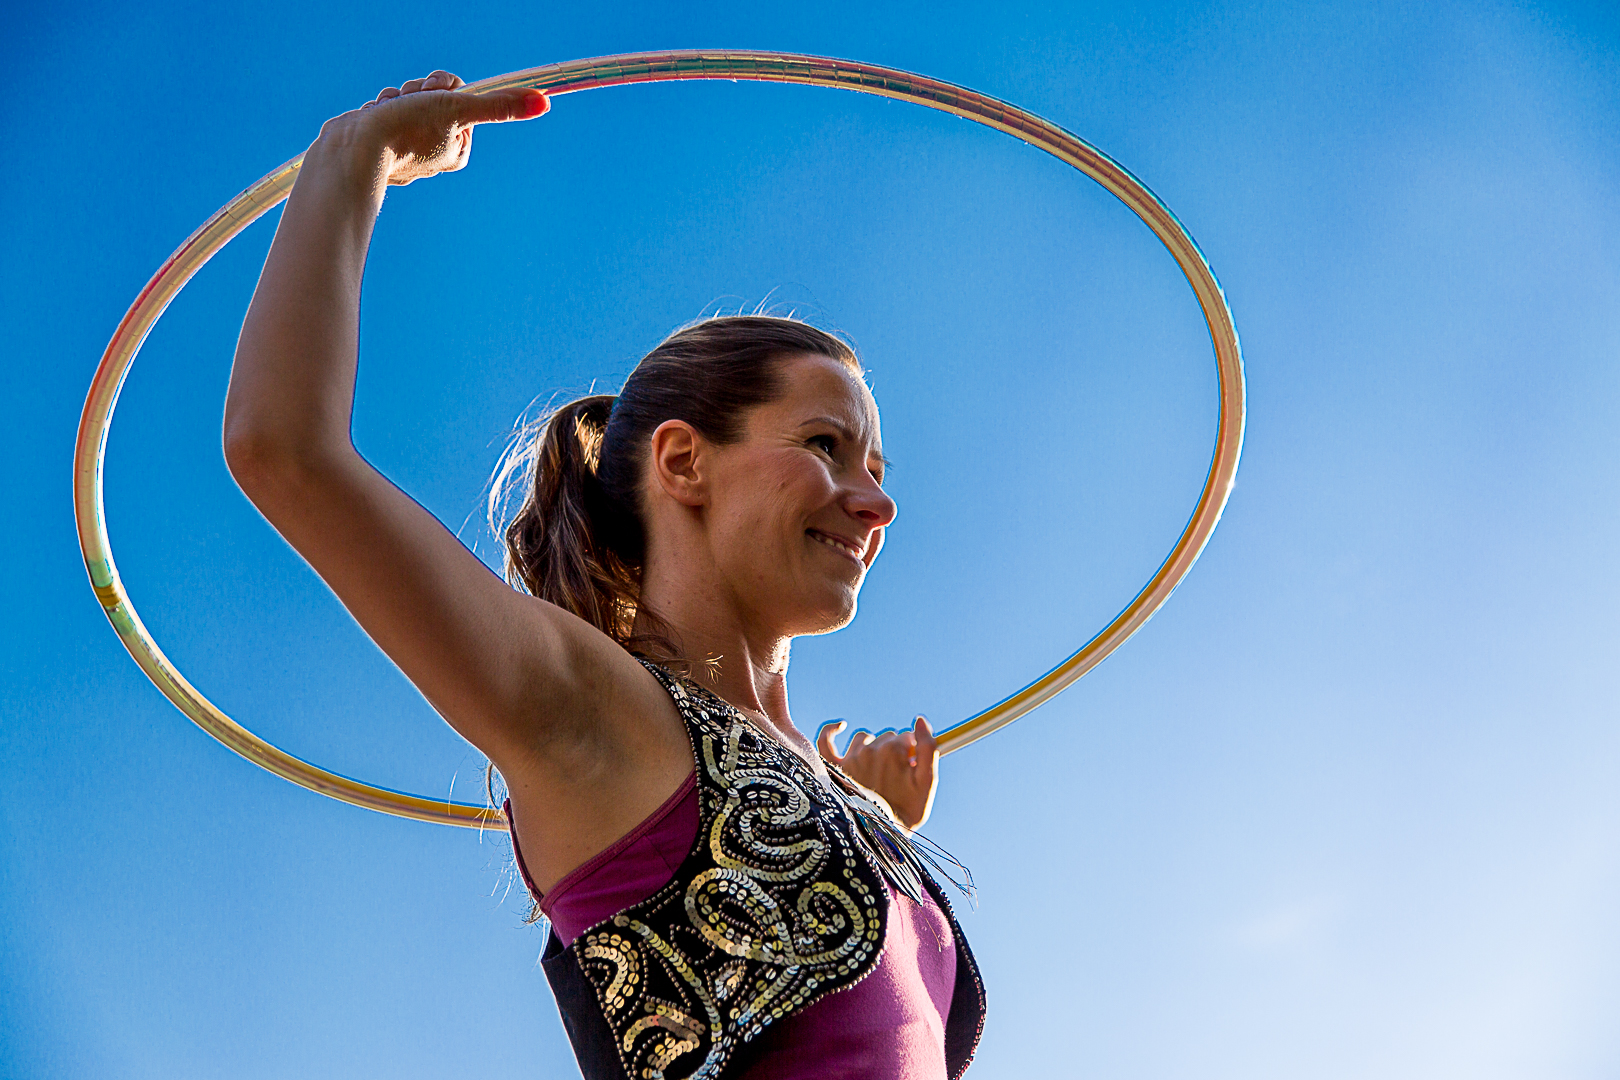 A woman against a blue sky, she holds a hula hoop over her head and beams.